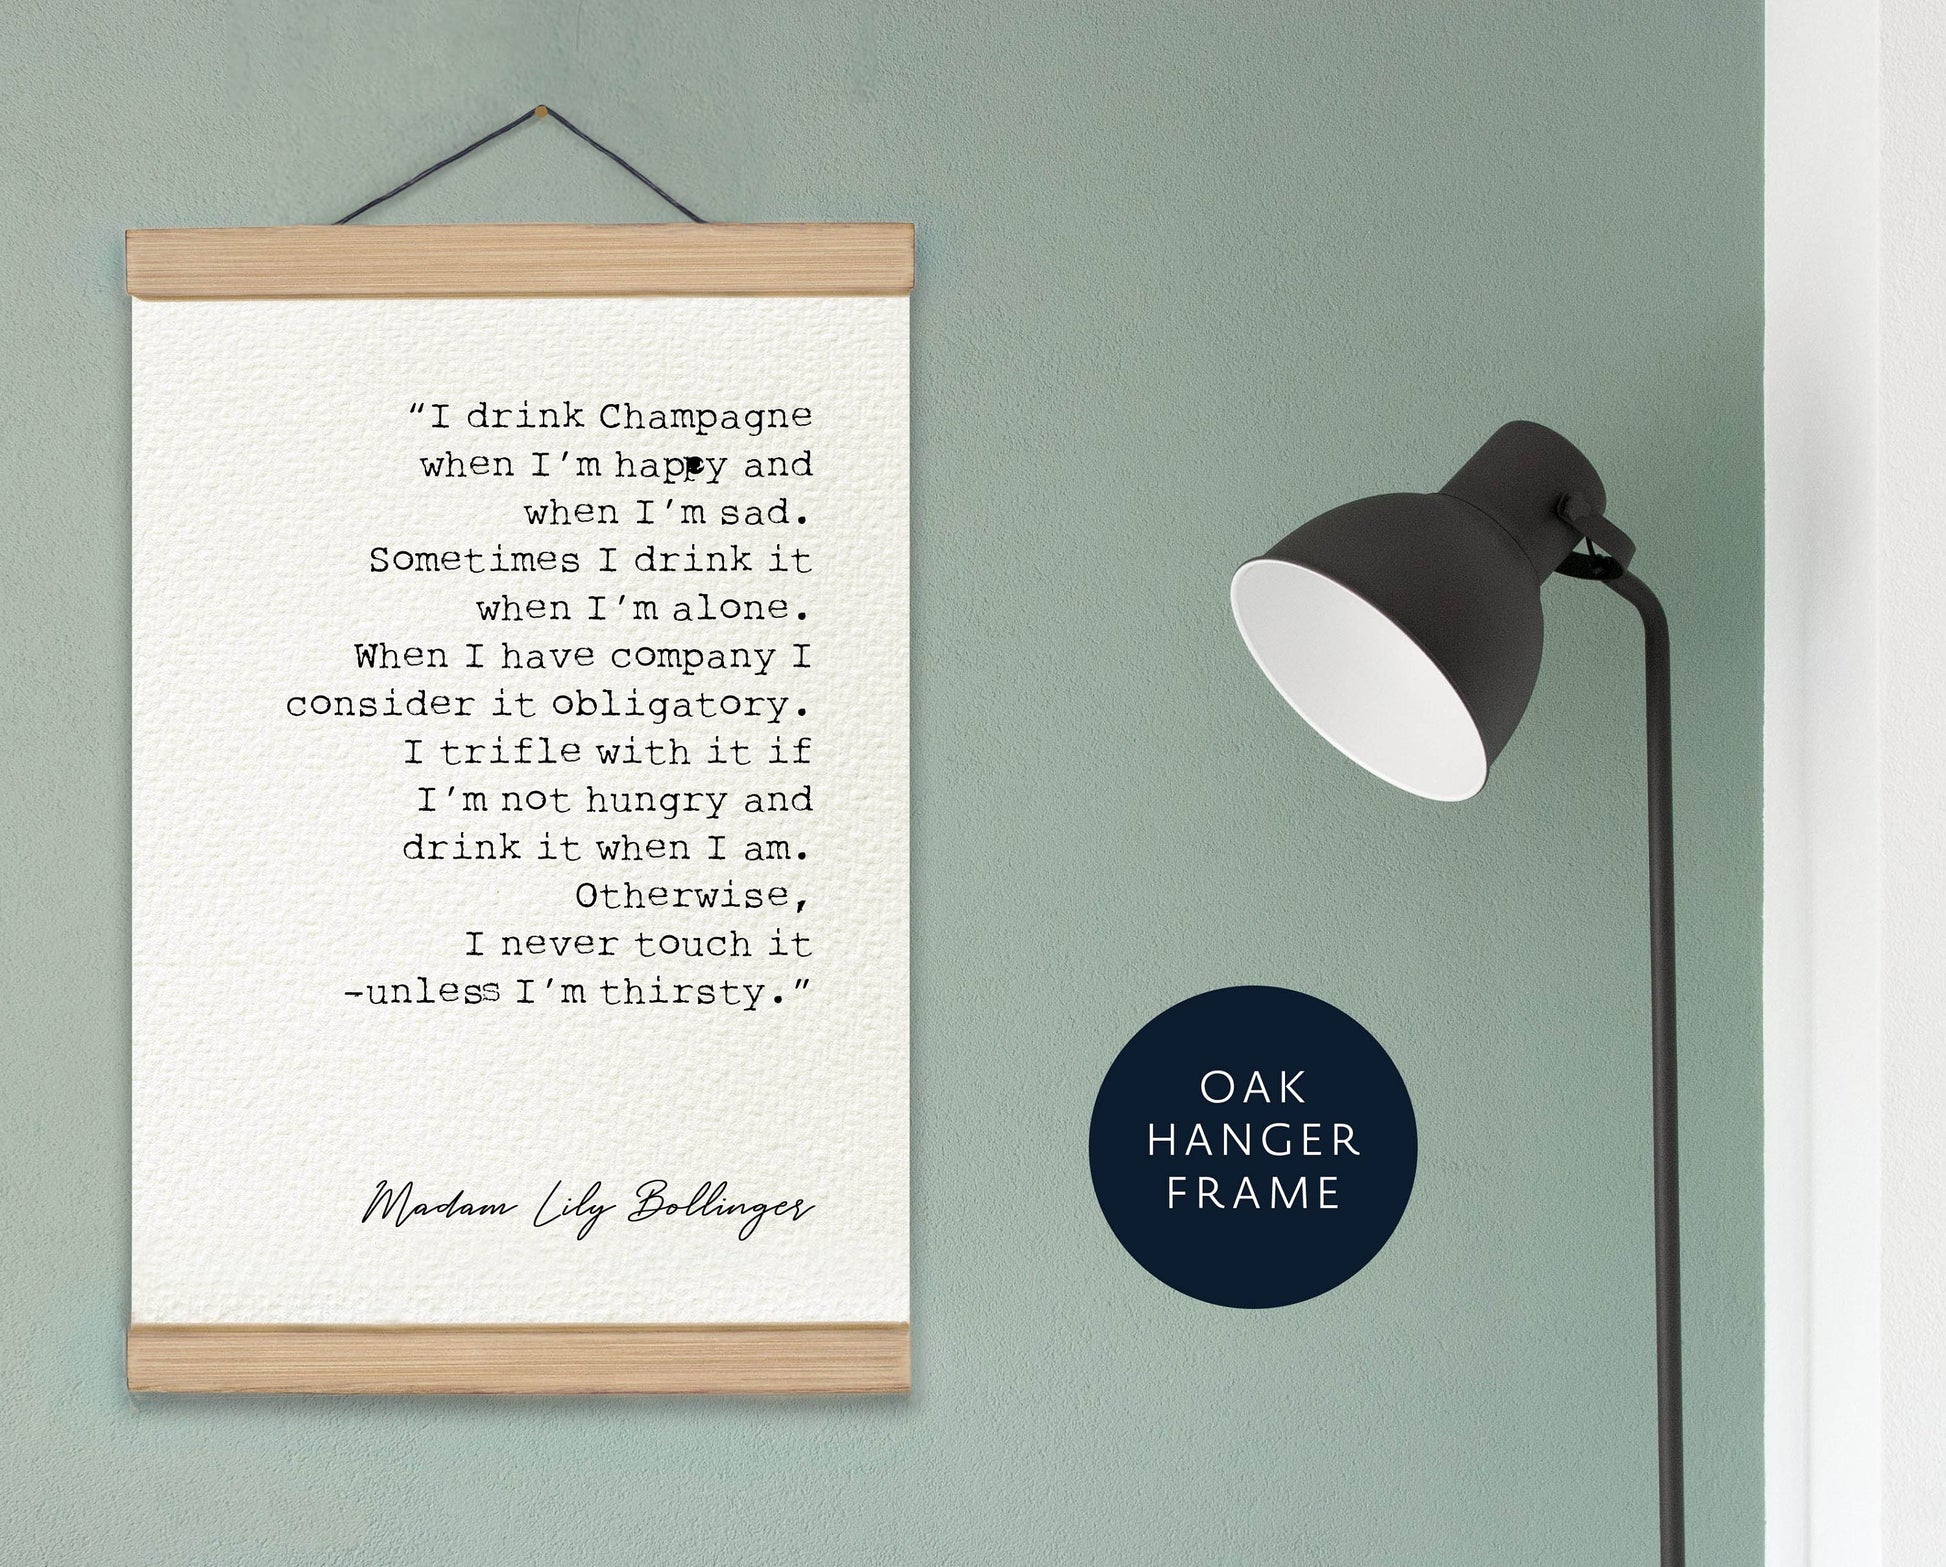 Champagne Quote - Lily Bollinger Champagne Quote Art Print - I drink Champagne when I’m happy - Fun Wall Decor - wall art poster